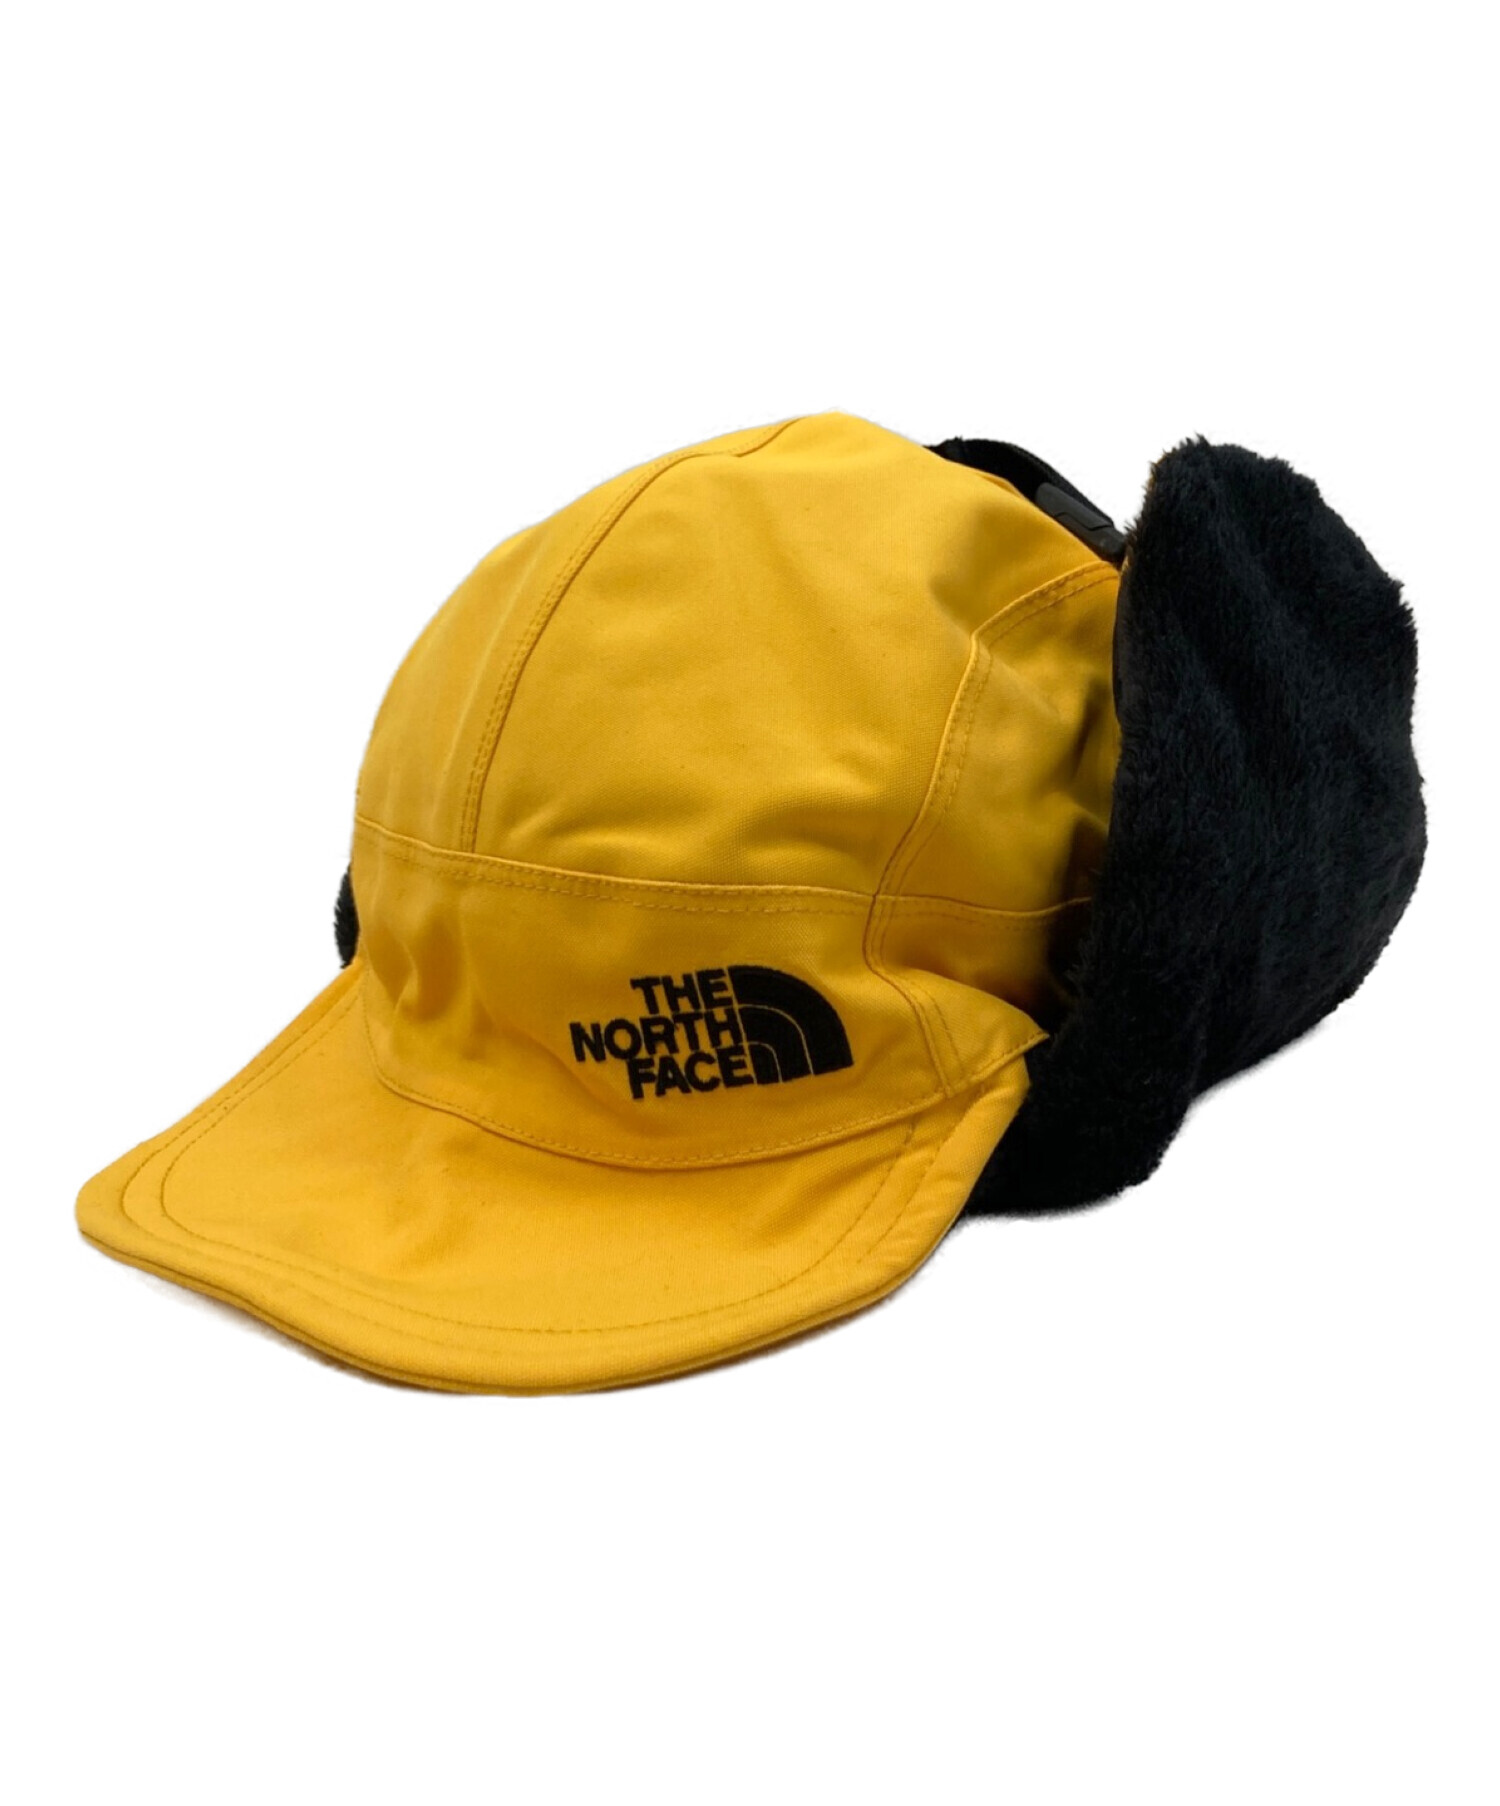 THE NORTH FACE Expedition Cap